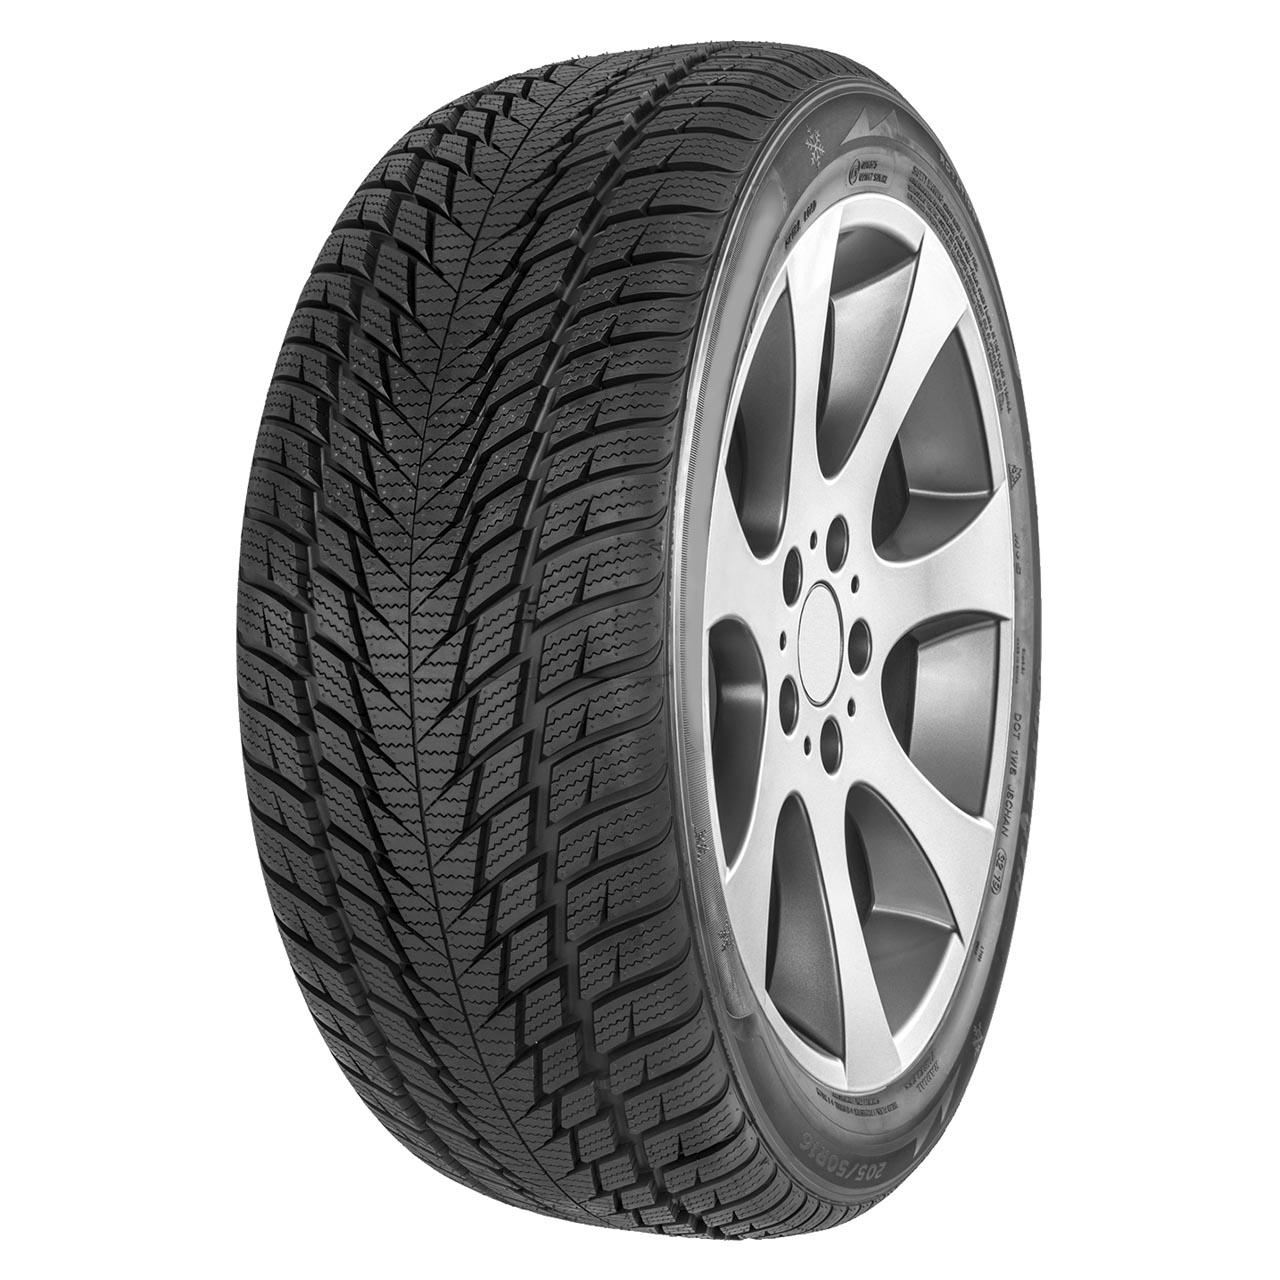 Gomme Nuove Fortuna 245/45 R19 102V GOWIN UHP2 XL M+S pneumatici nuovi Invernale